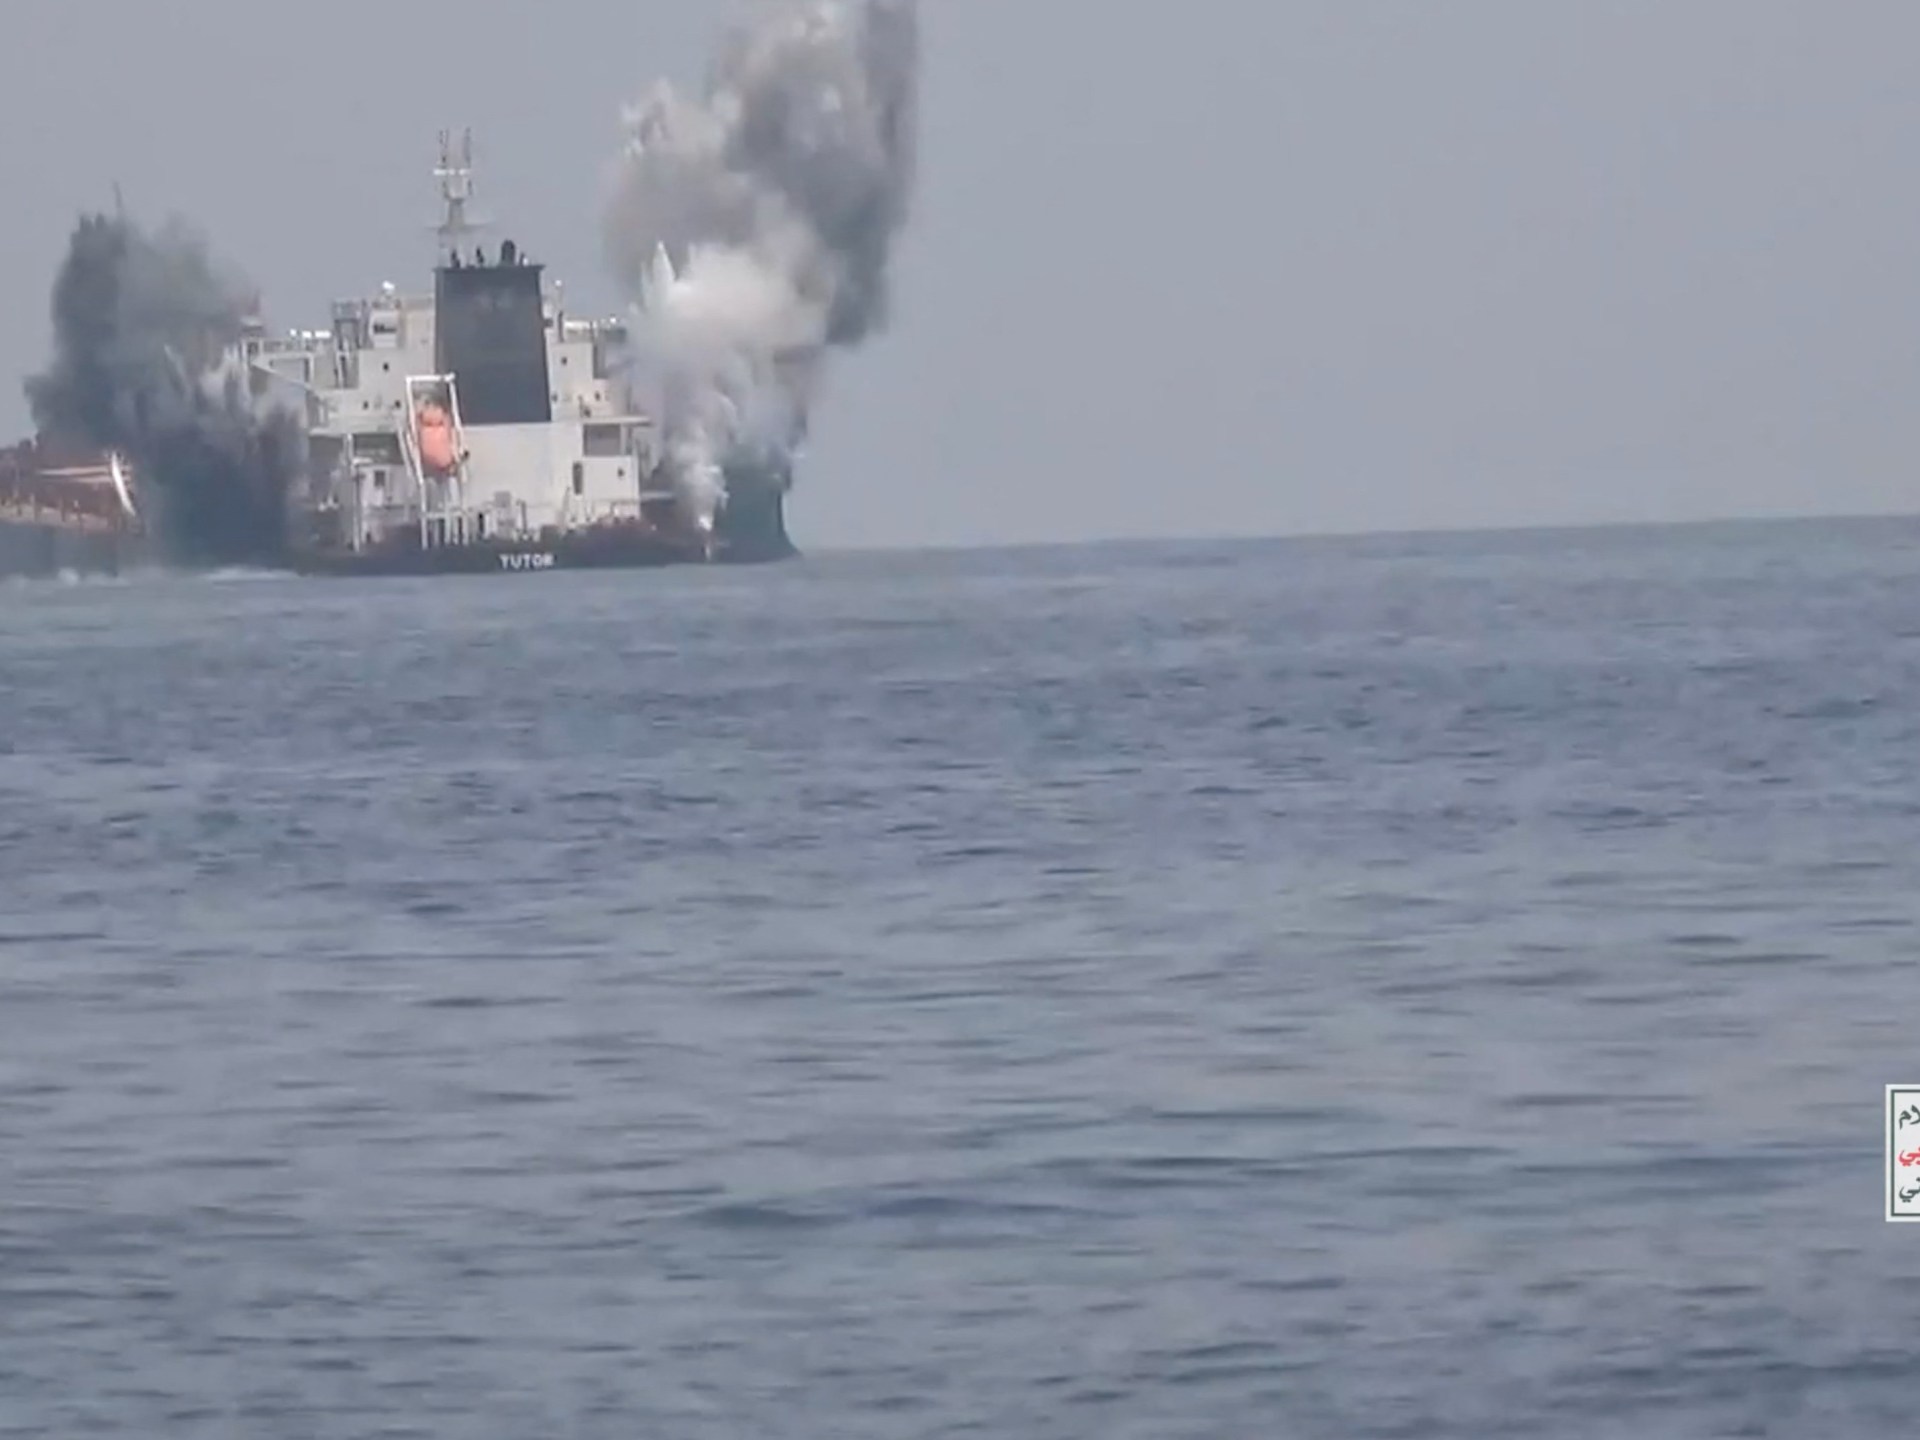 Houthis claim attack on ship that docked in Israel | Israel-Palestine conflict News [Video]